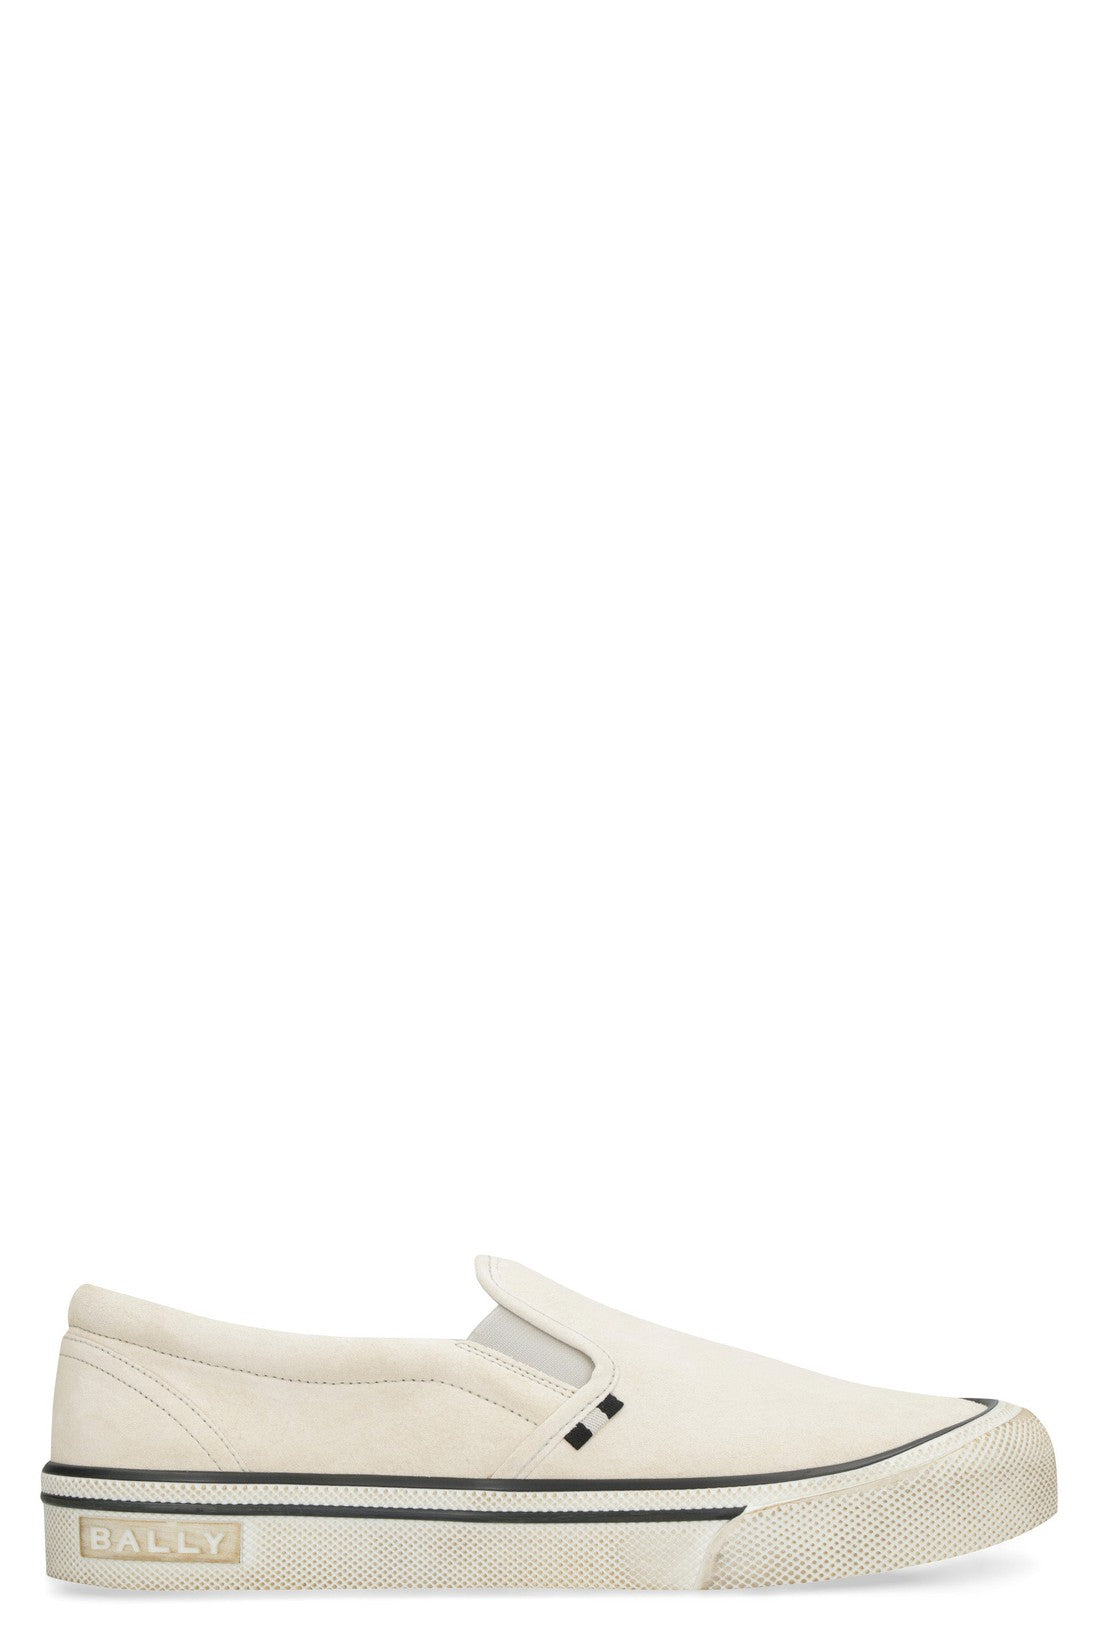 Bally-OUTLET-SALE-Slip-on sneakers in suede-ARCHIVIST